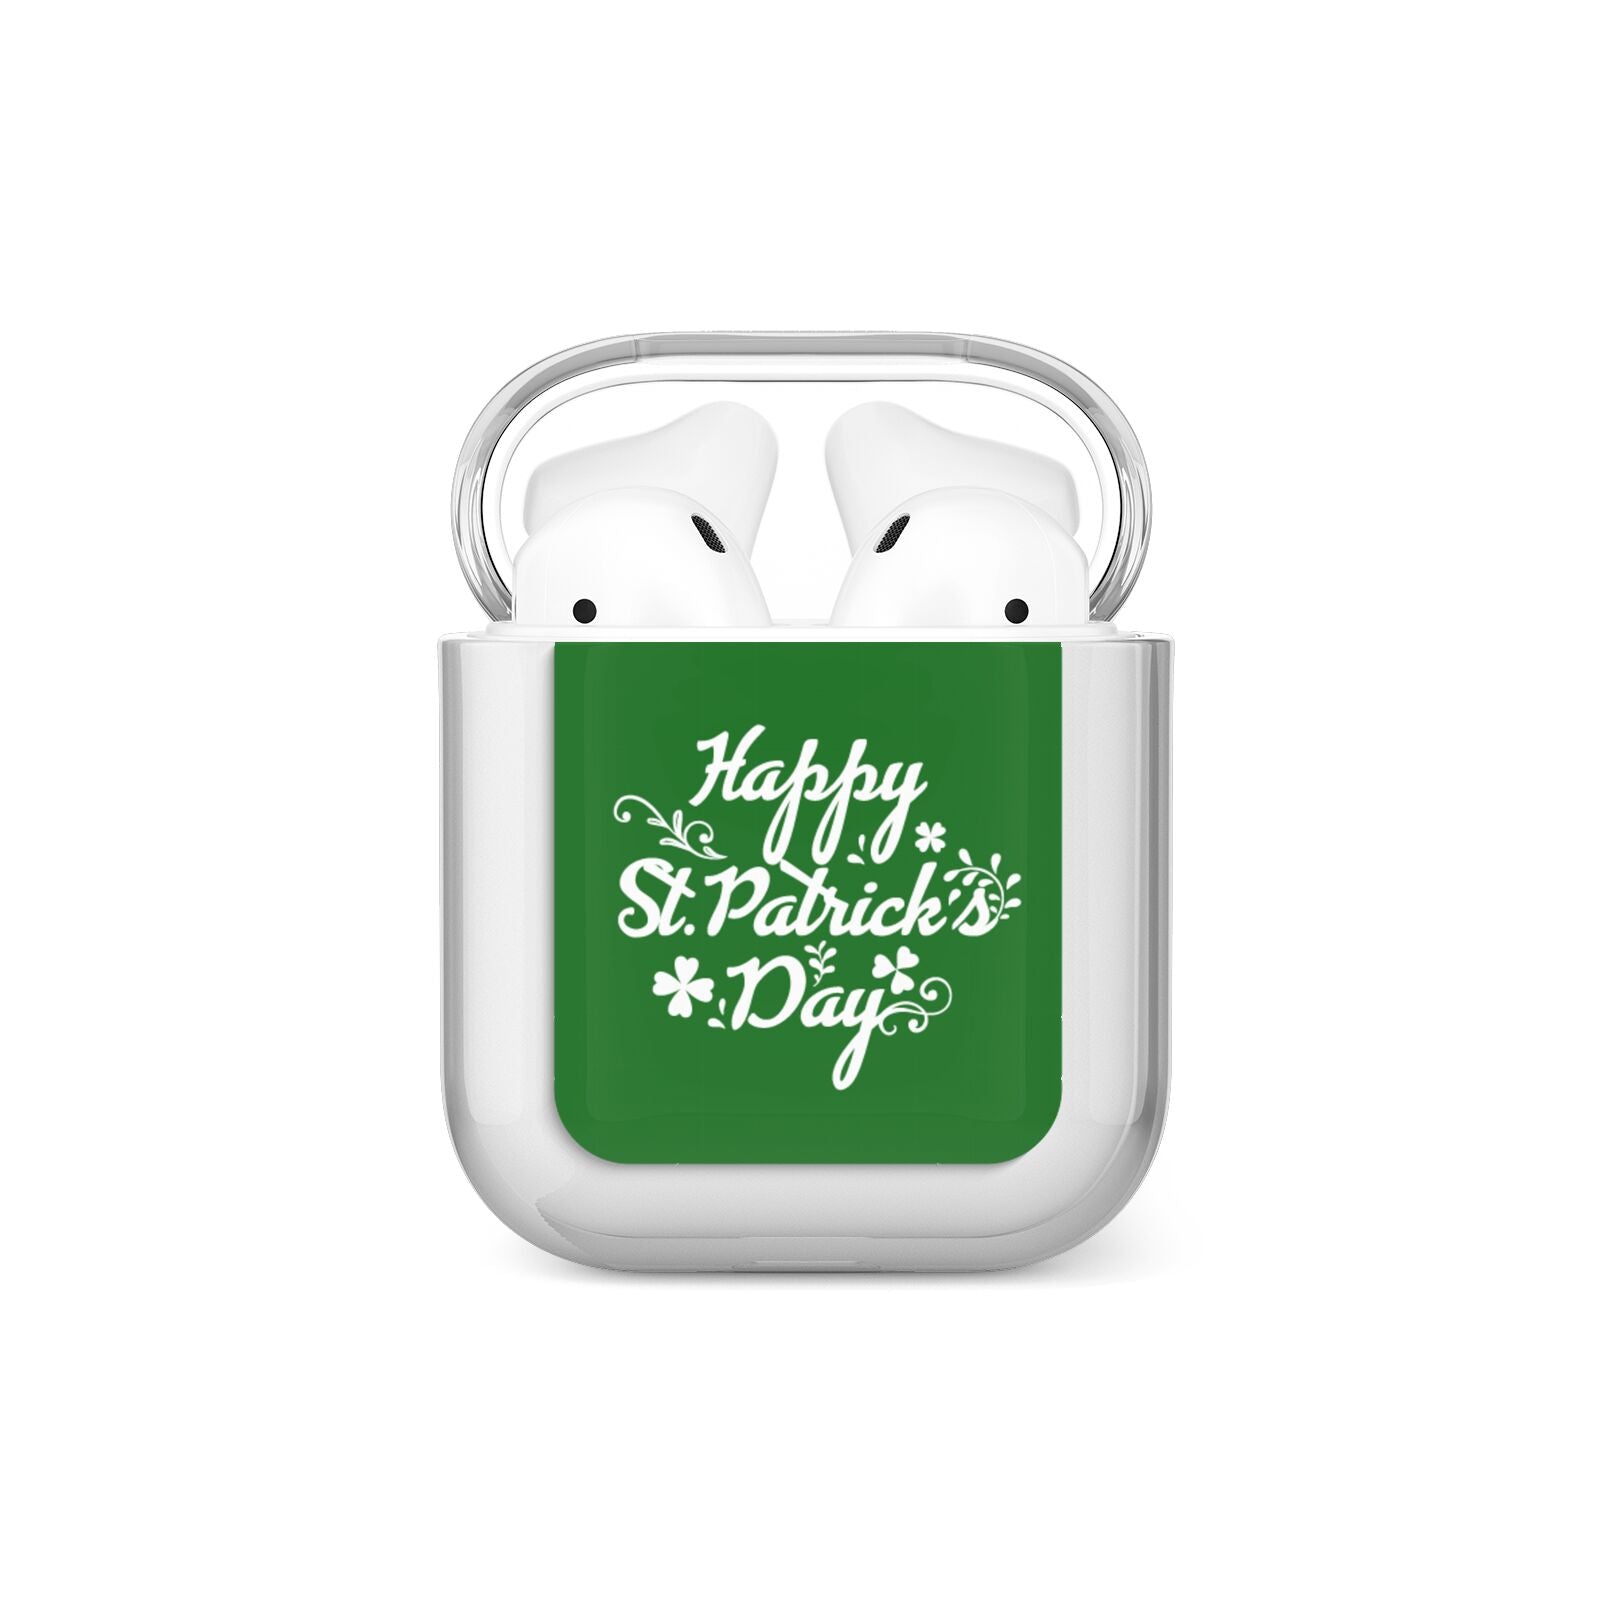 St Patricks Day AirPods Case